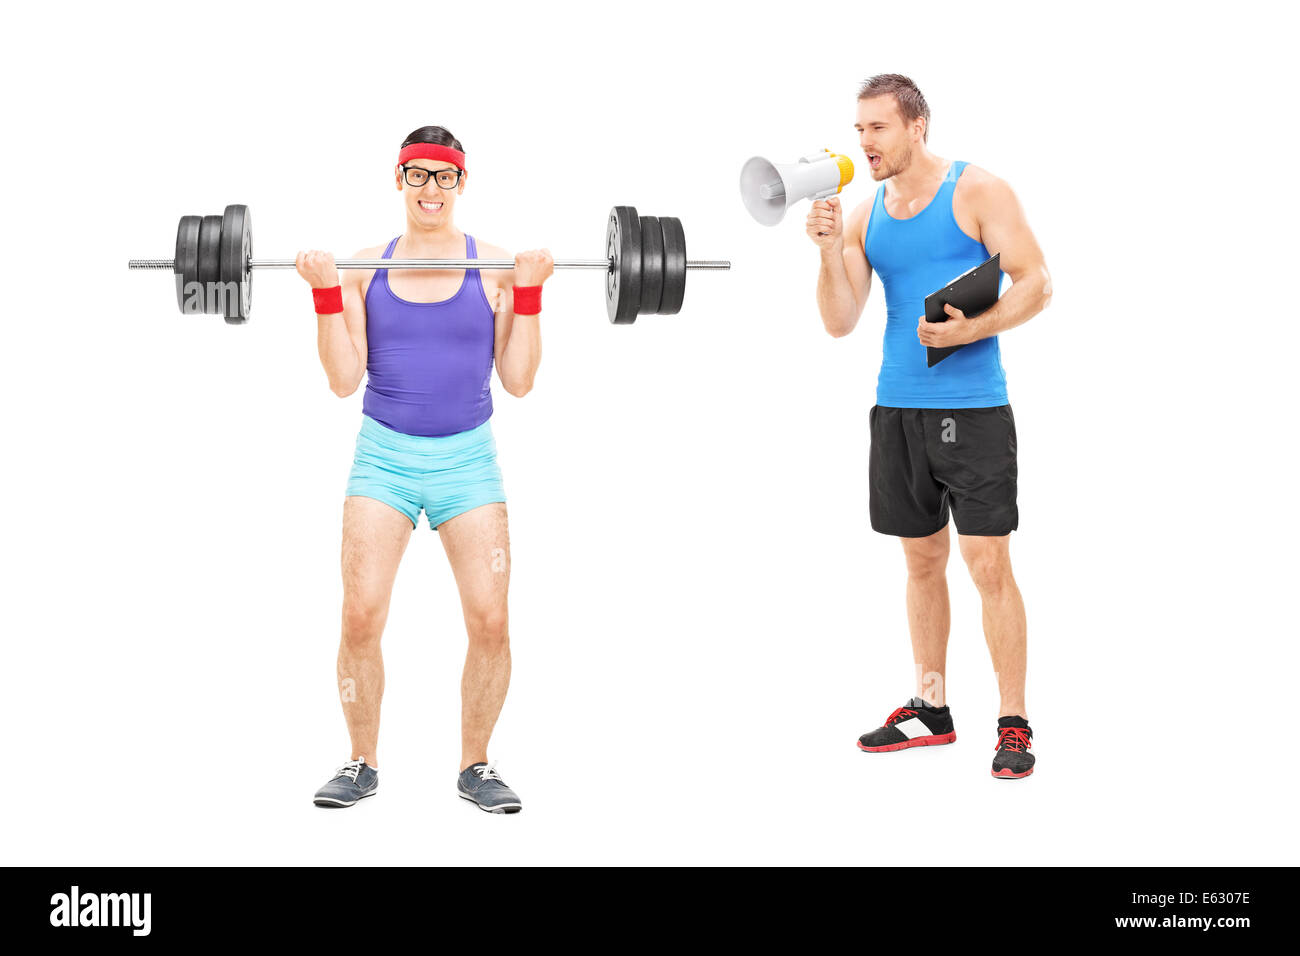 Fitness coach shouting at a nerdy guy through megaphone Stock Photo